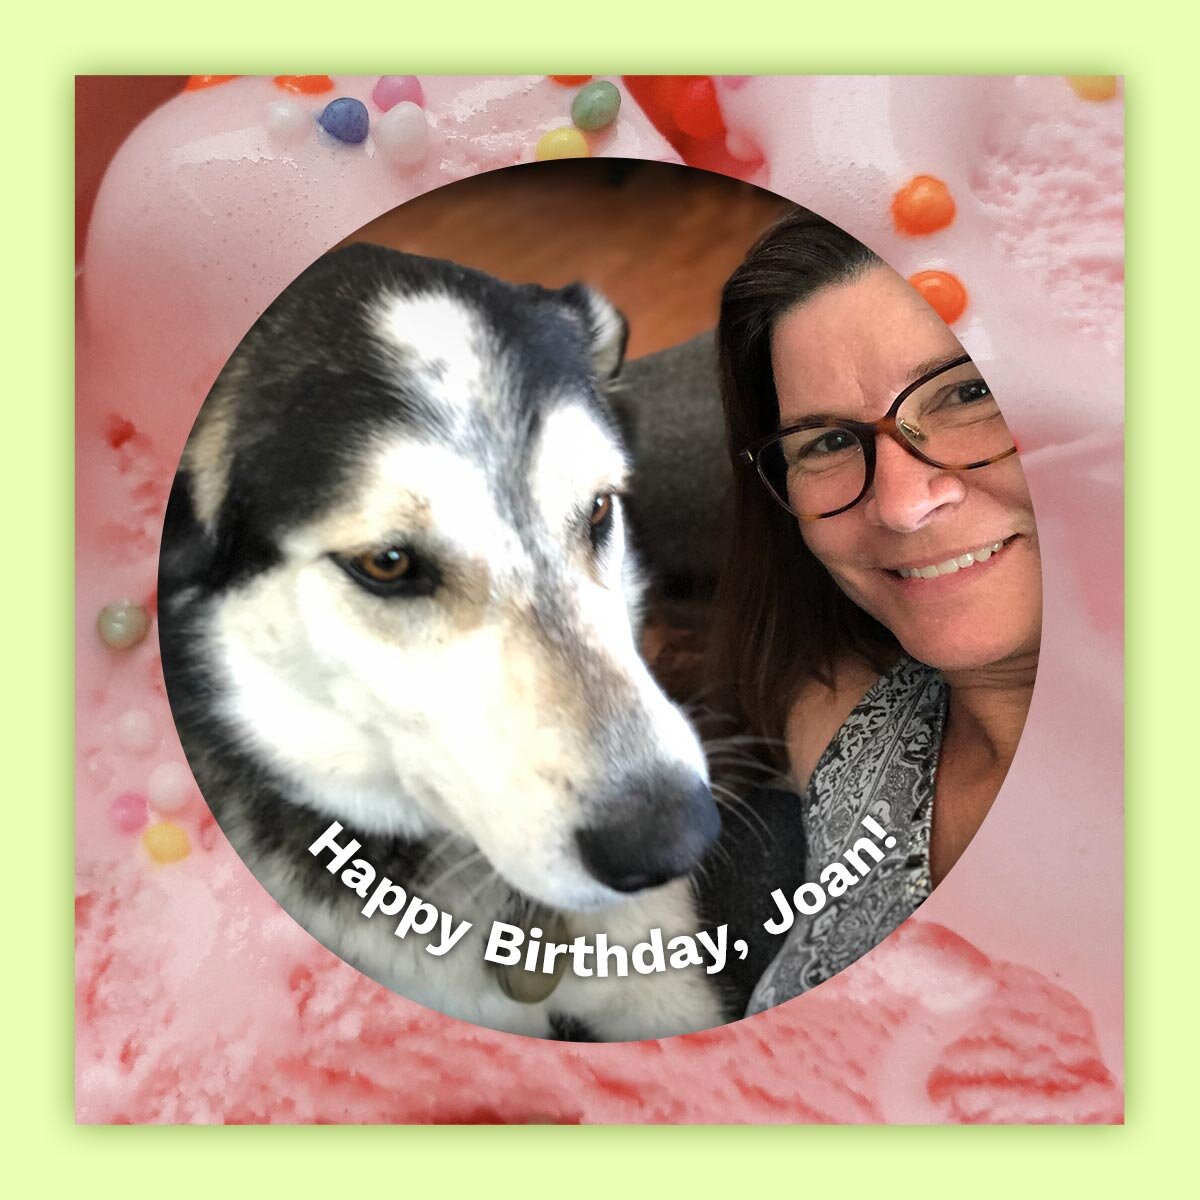 Happy birthday to Account Services Director and resident sheep wrangler Joan! 🎉 We hope your day is be-ewe-tiful! 🐑